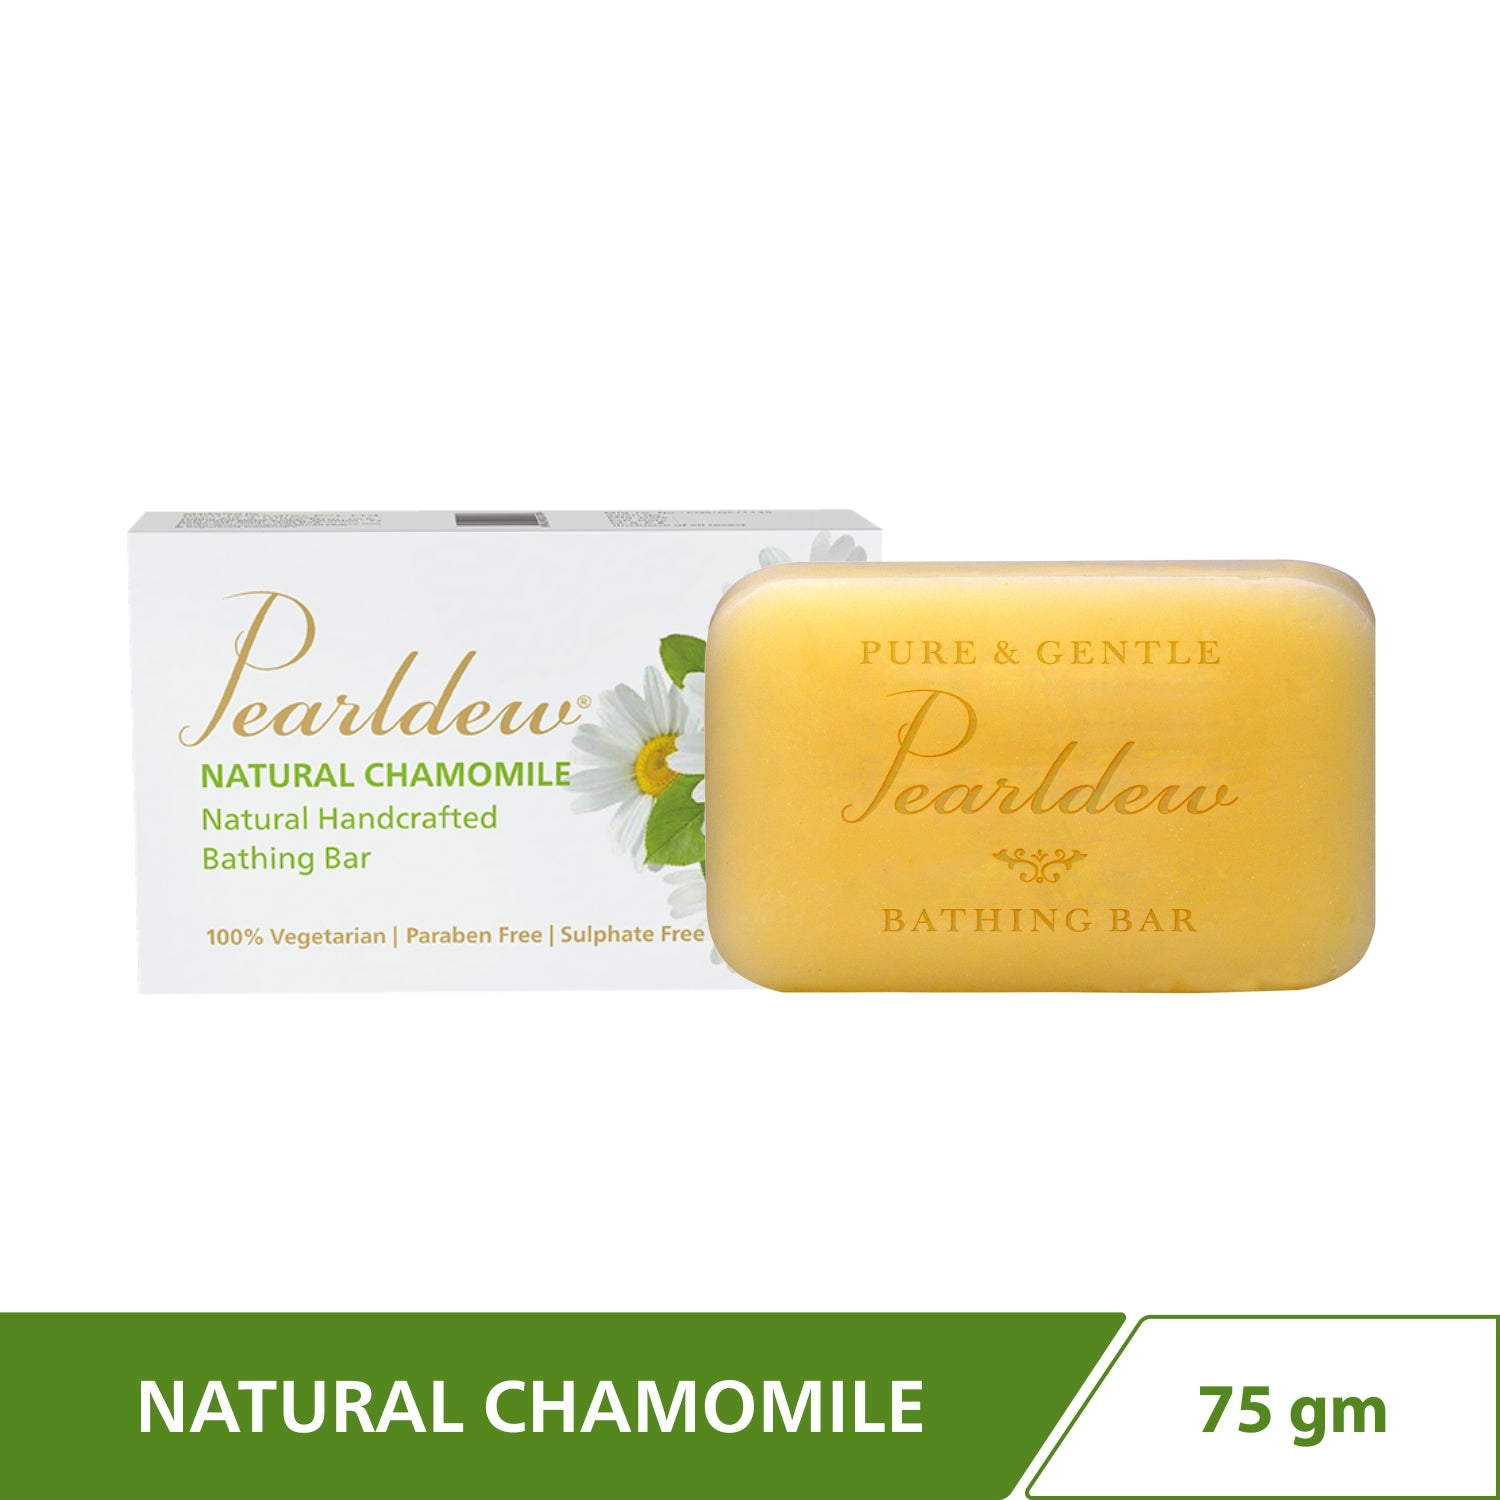 Pearldew Natural Chamomile Natural Handcrafted Bathing Bar (75 gm)